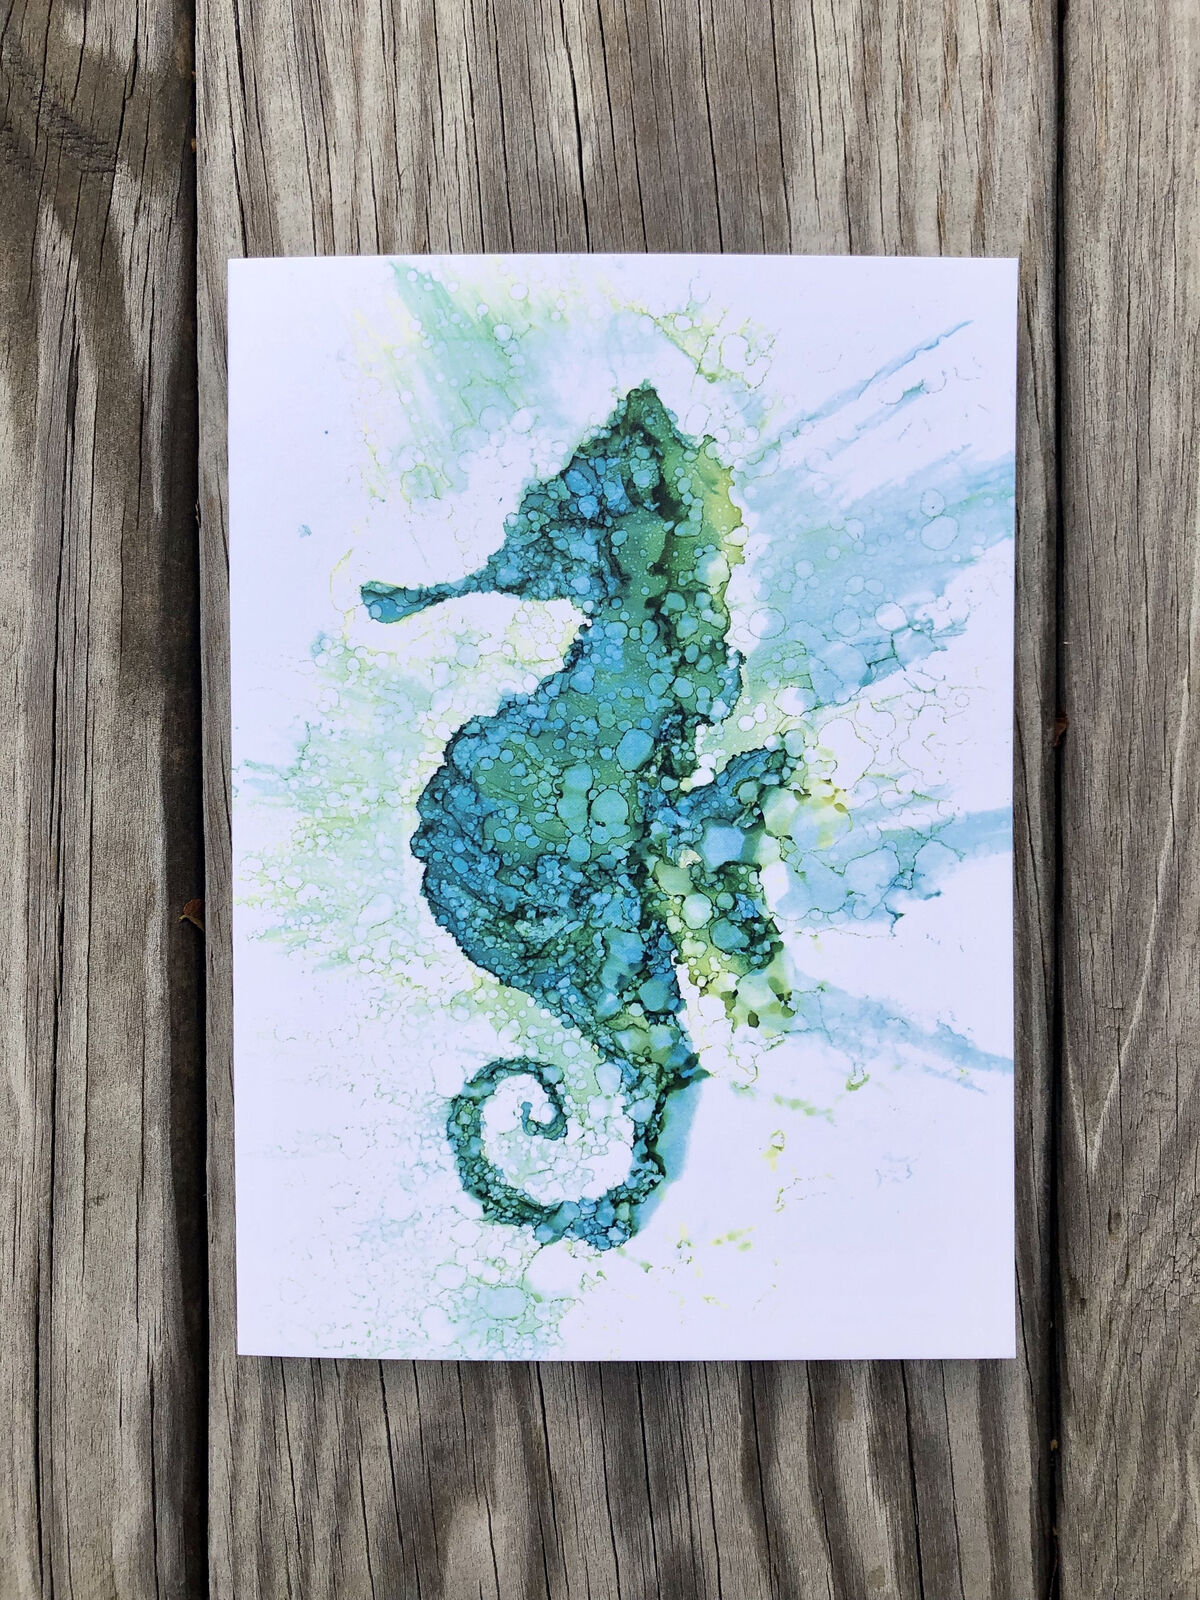 Seahorse : Greeting Card Undisclosed